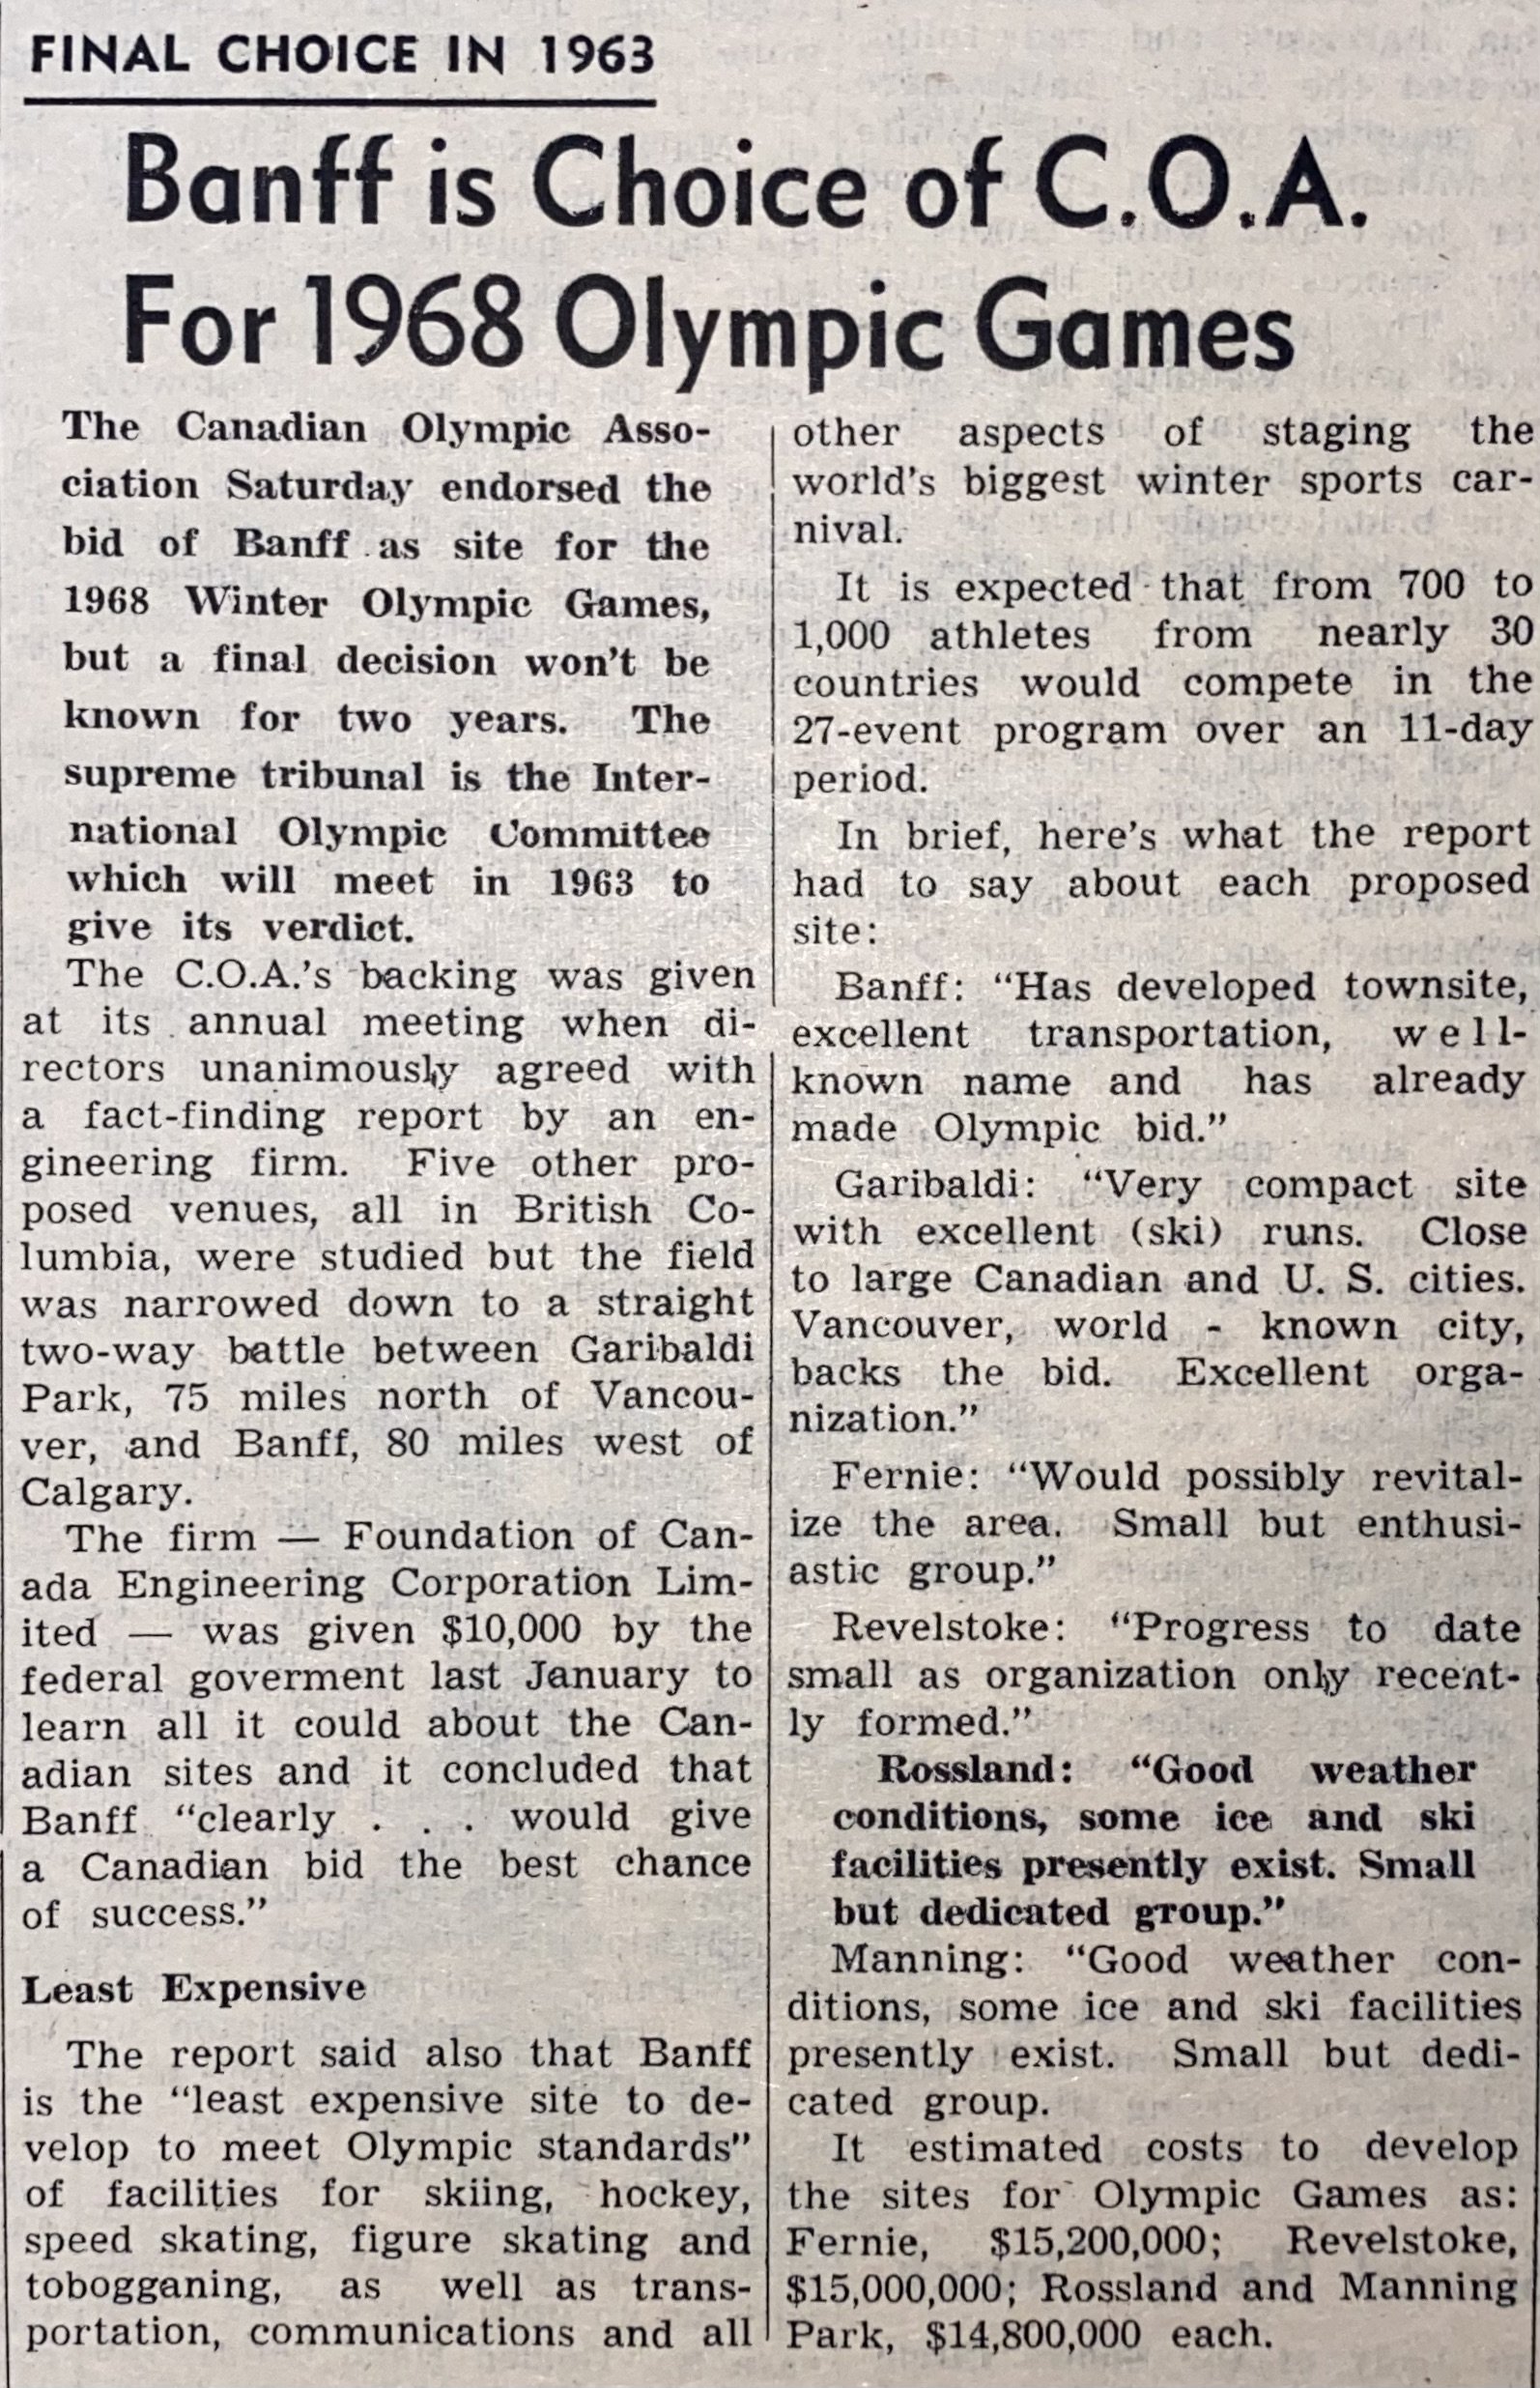 Rossland Miner: "Banff is Choice of C.O.A. For 1968 Olympic Games" - April 26, 1961